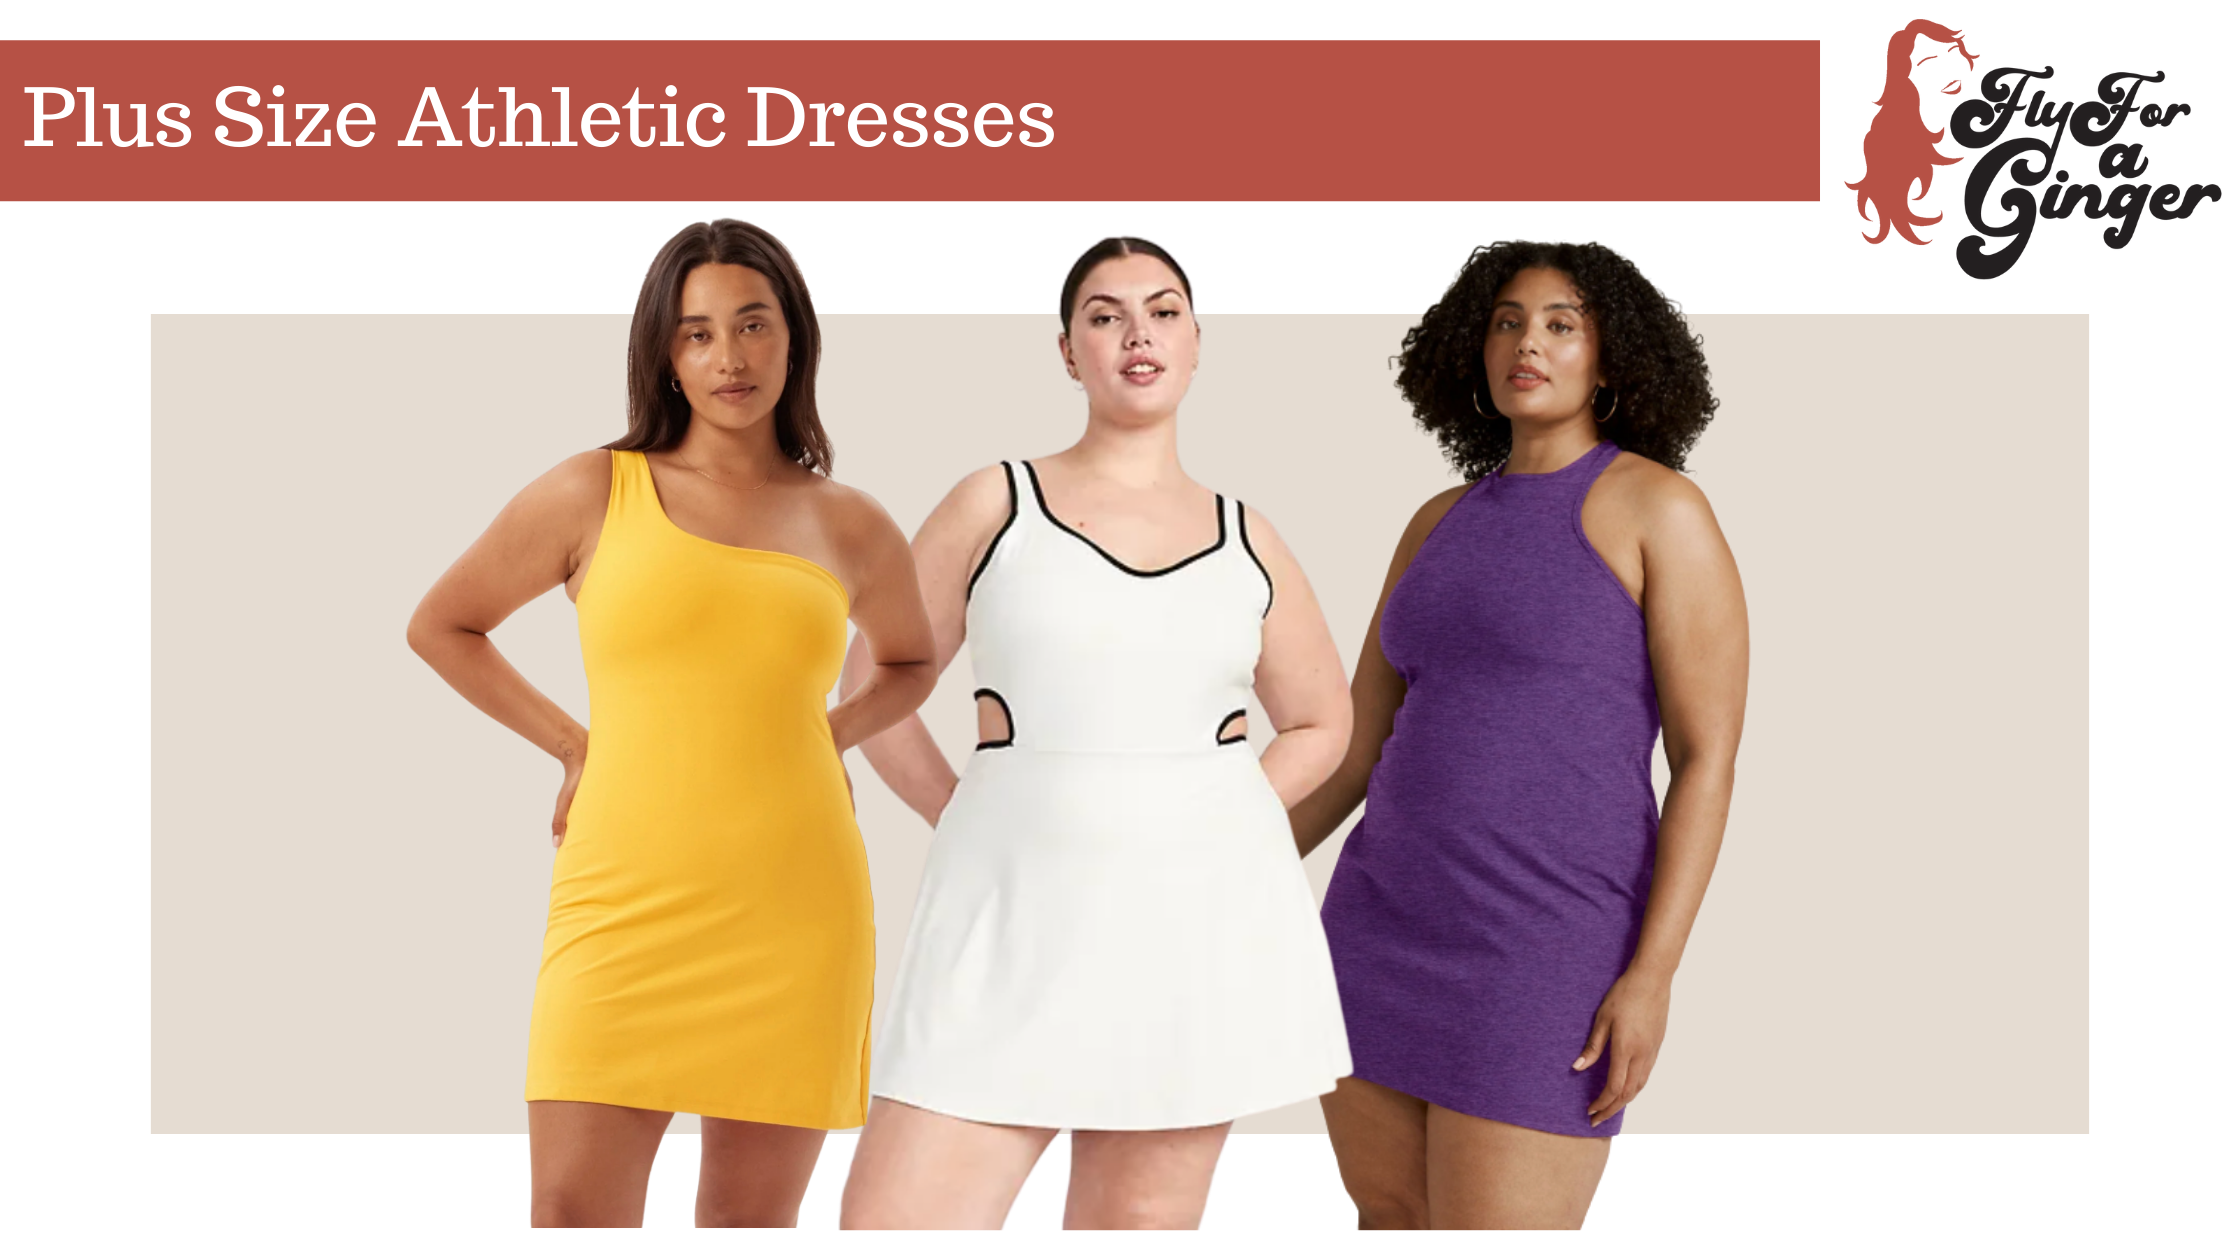 Plus Size Athletic Dresses // Where to Find Athletic Dresses in